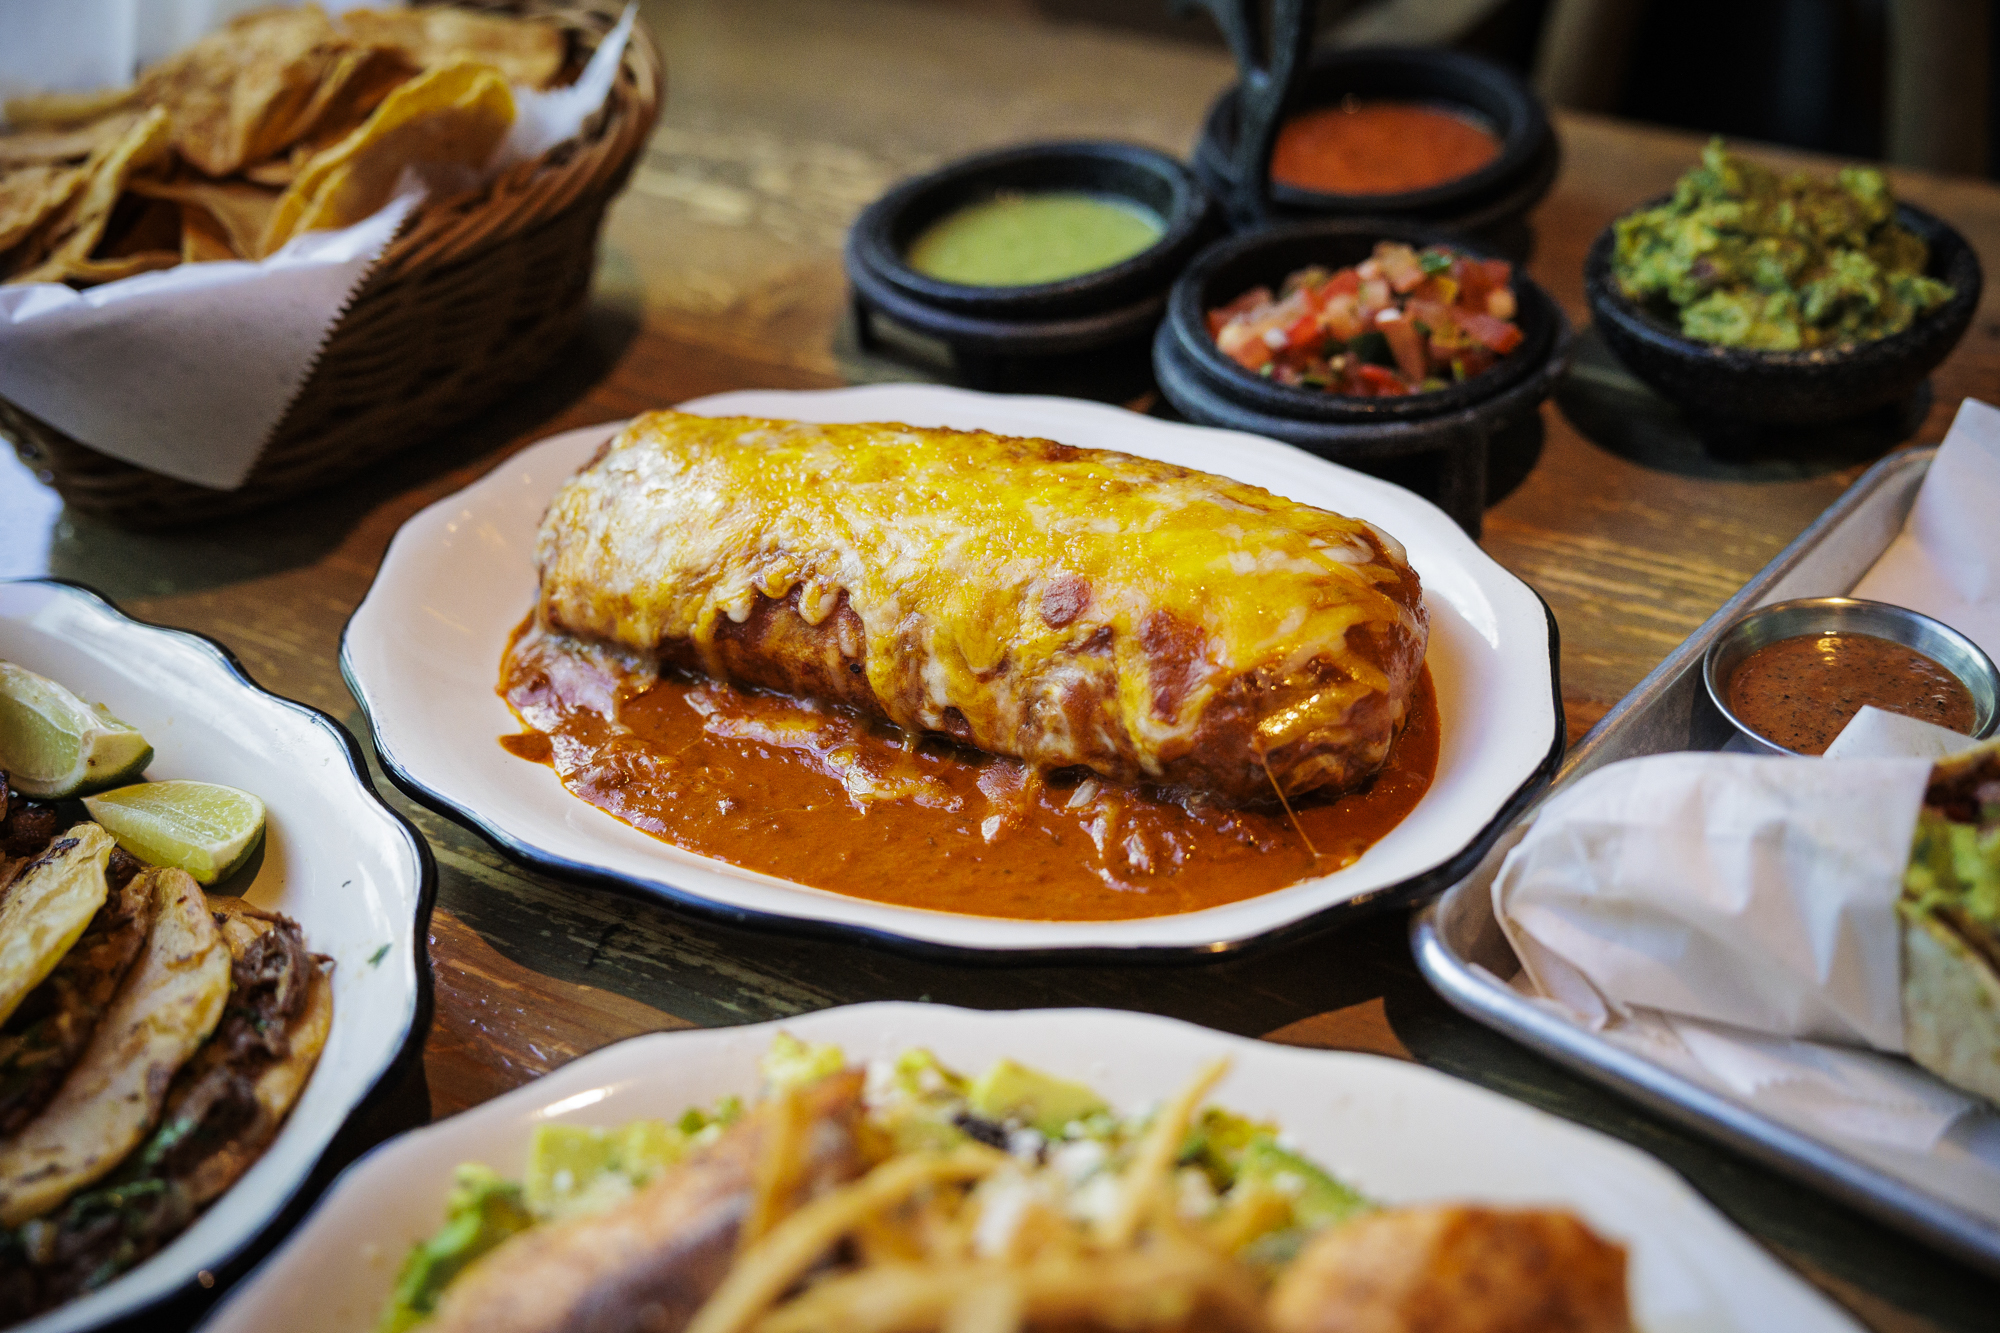 A sauce-drenched wet burrito on a plate.